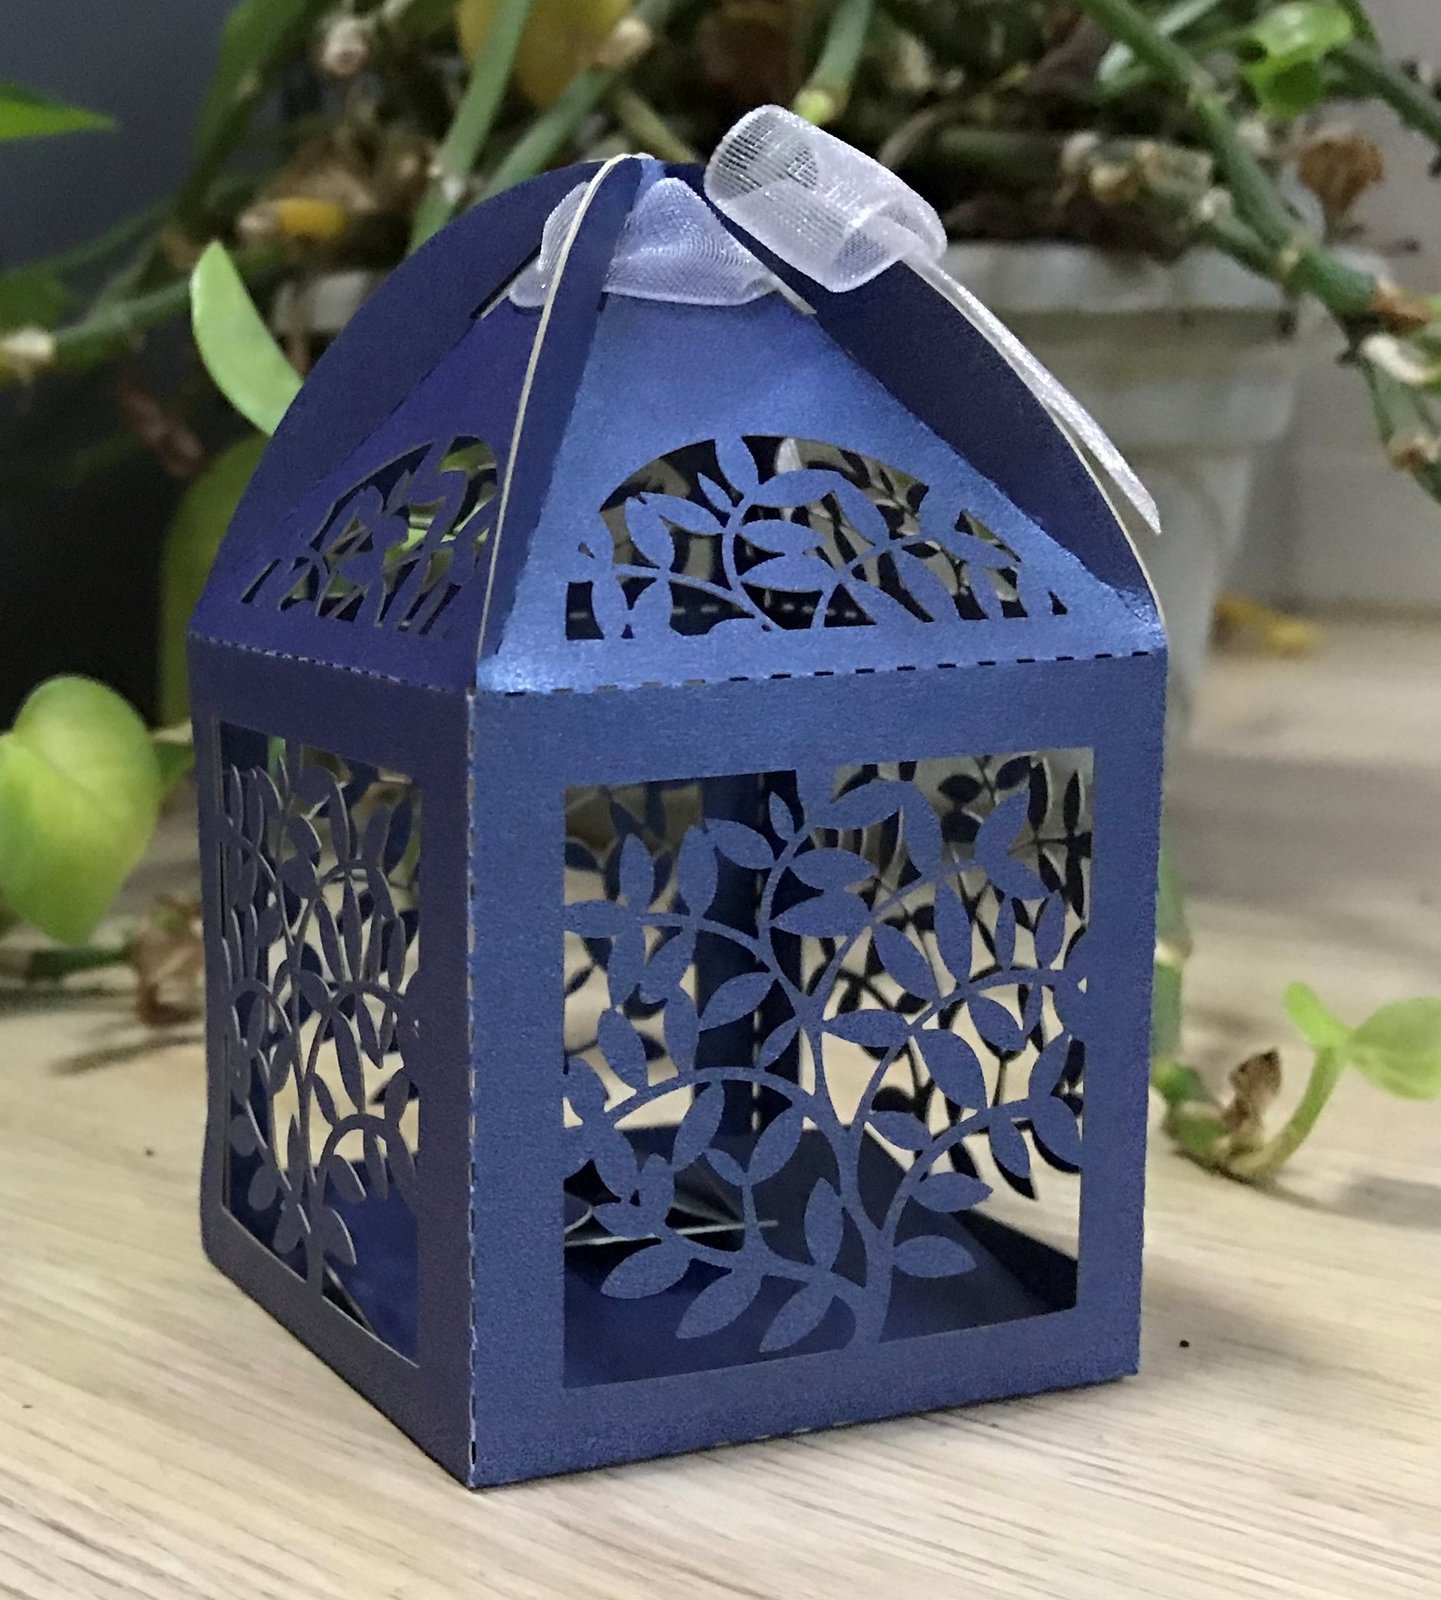 100pcs Pearl Navy Blue leaf Laser Cut Wedding Favor Boxes with ribbon,customized - $34.00